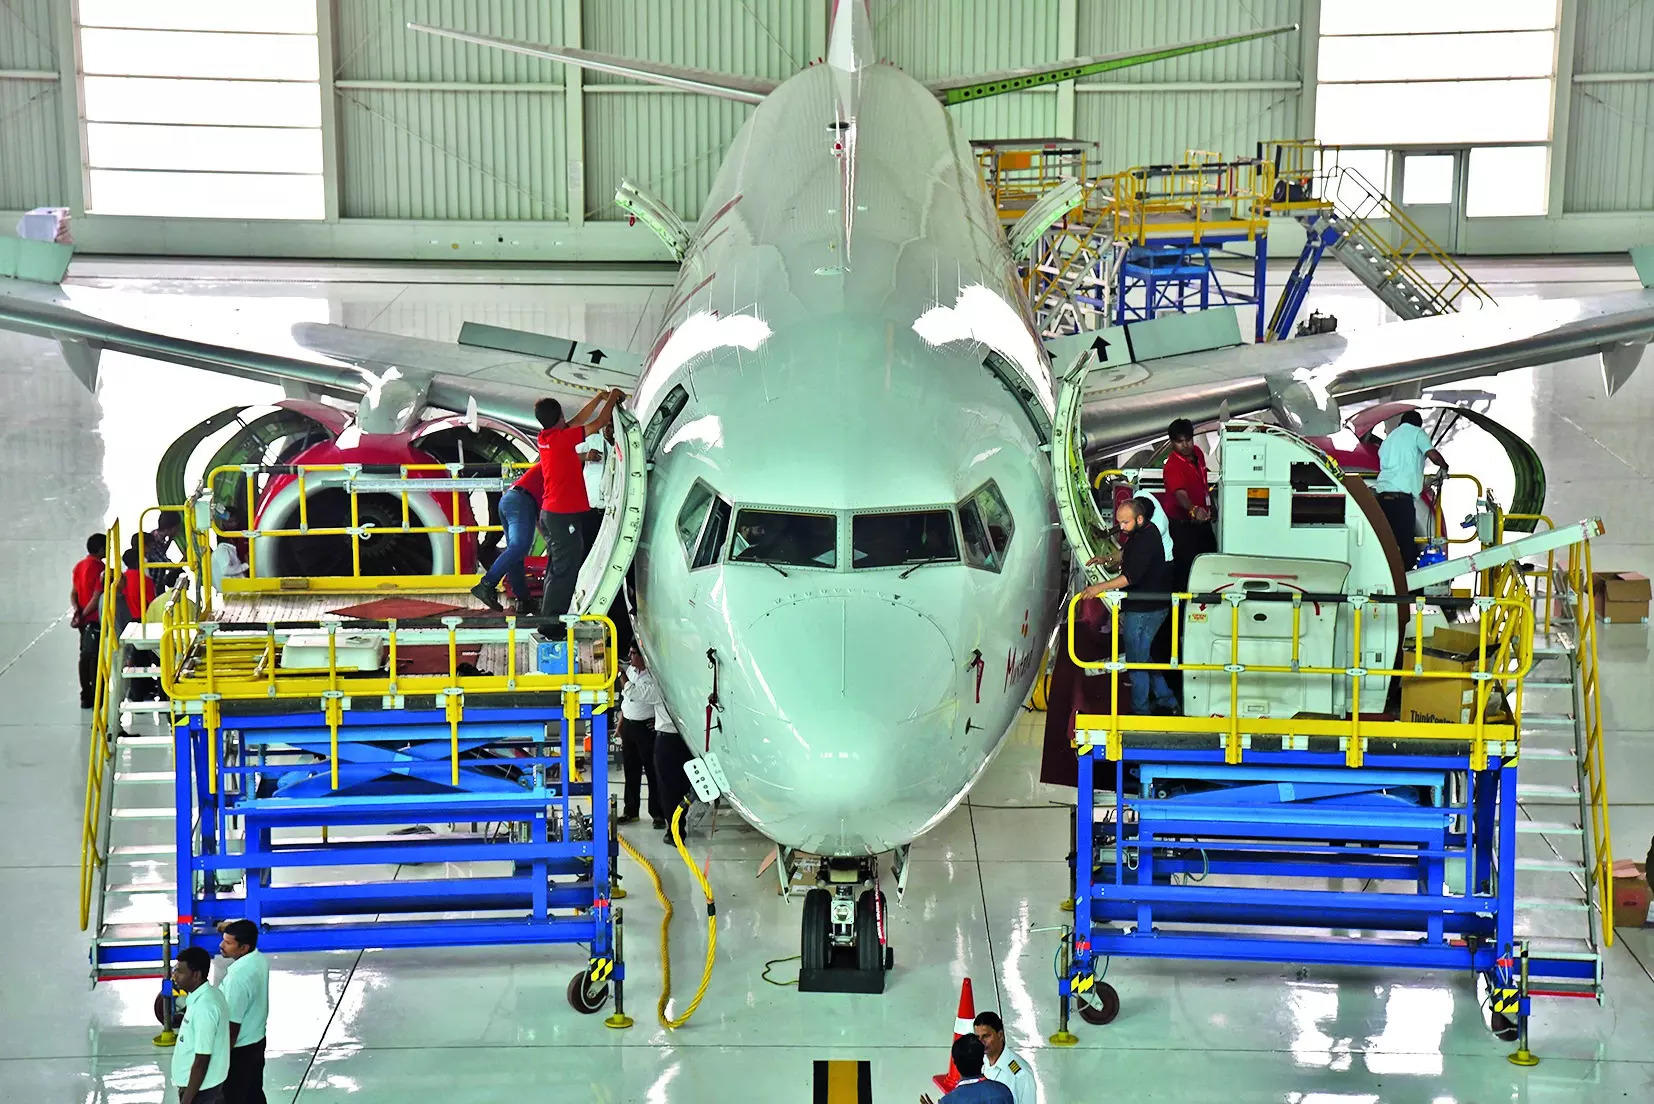 Budget announcement to give a boost to engine overhaul business of MROs 